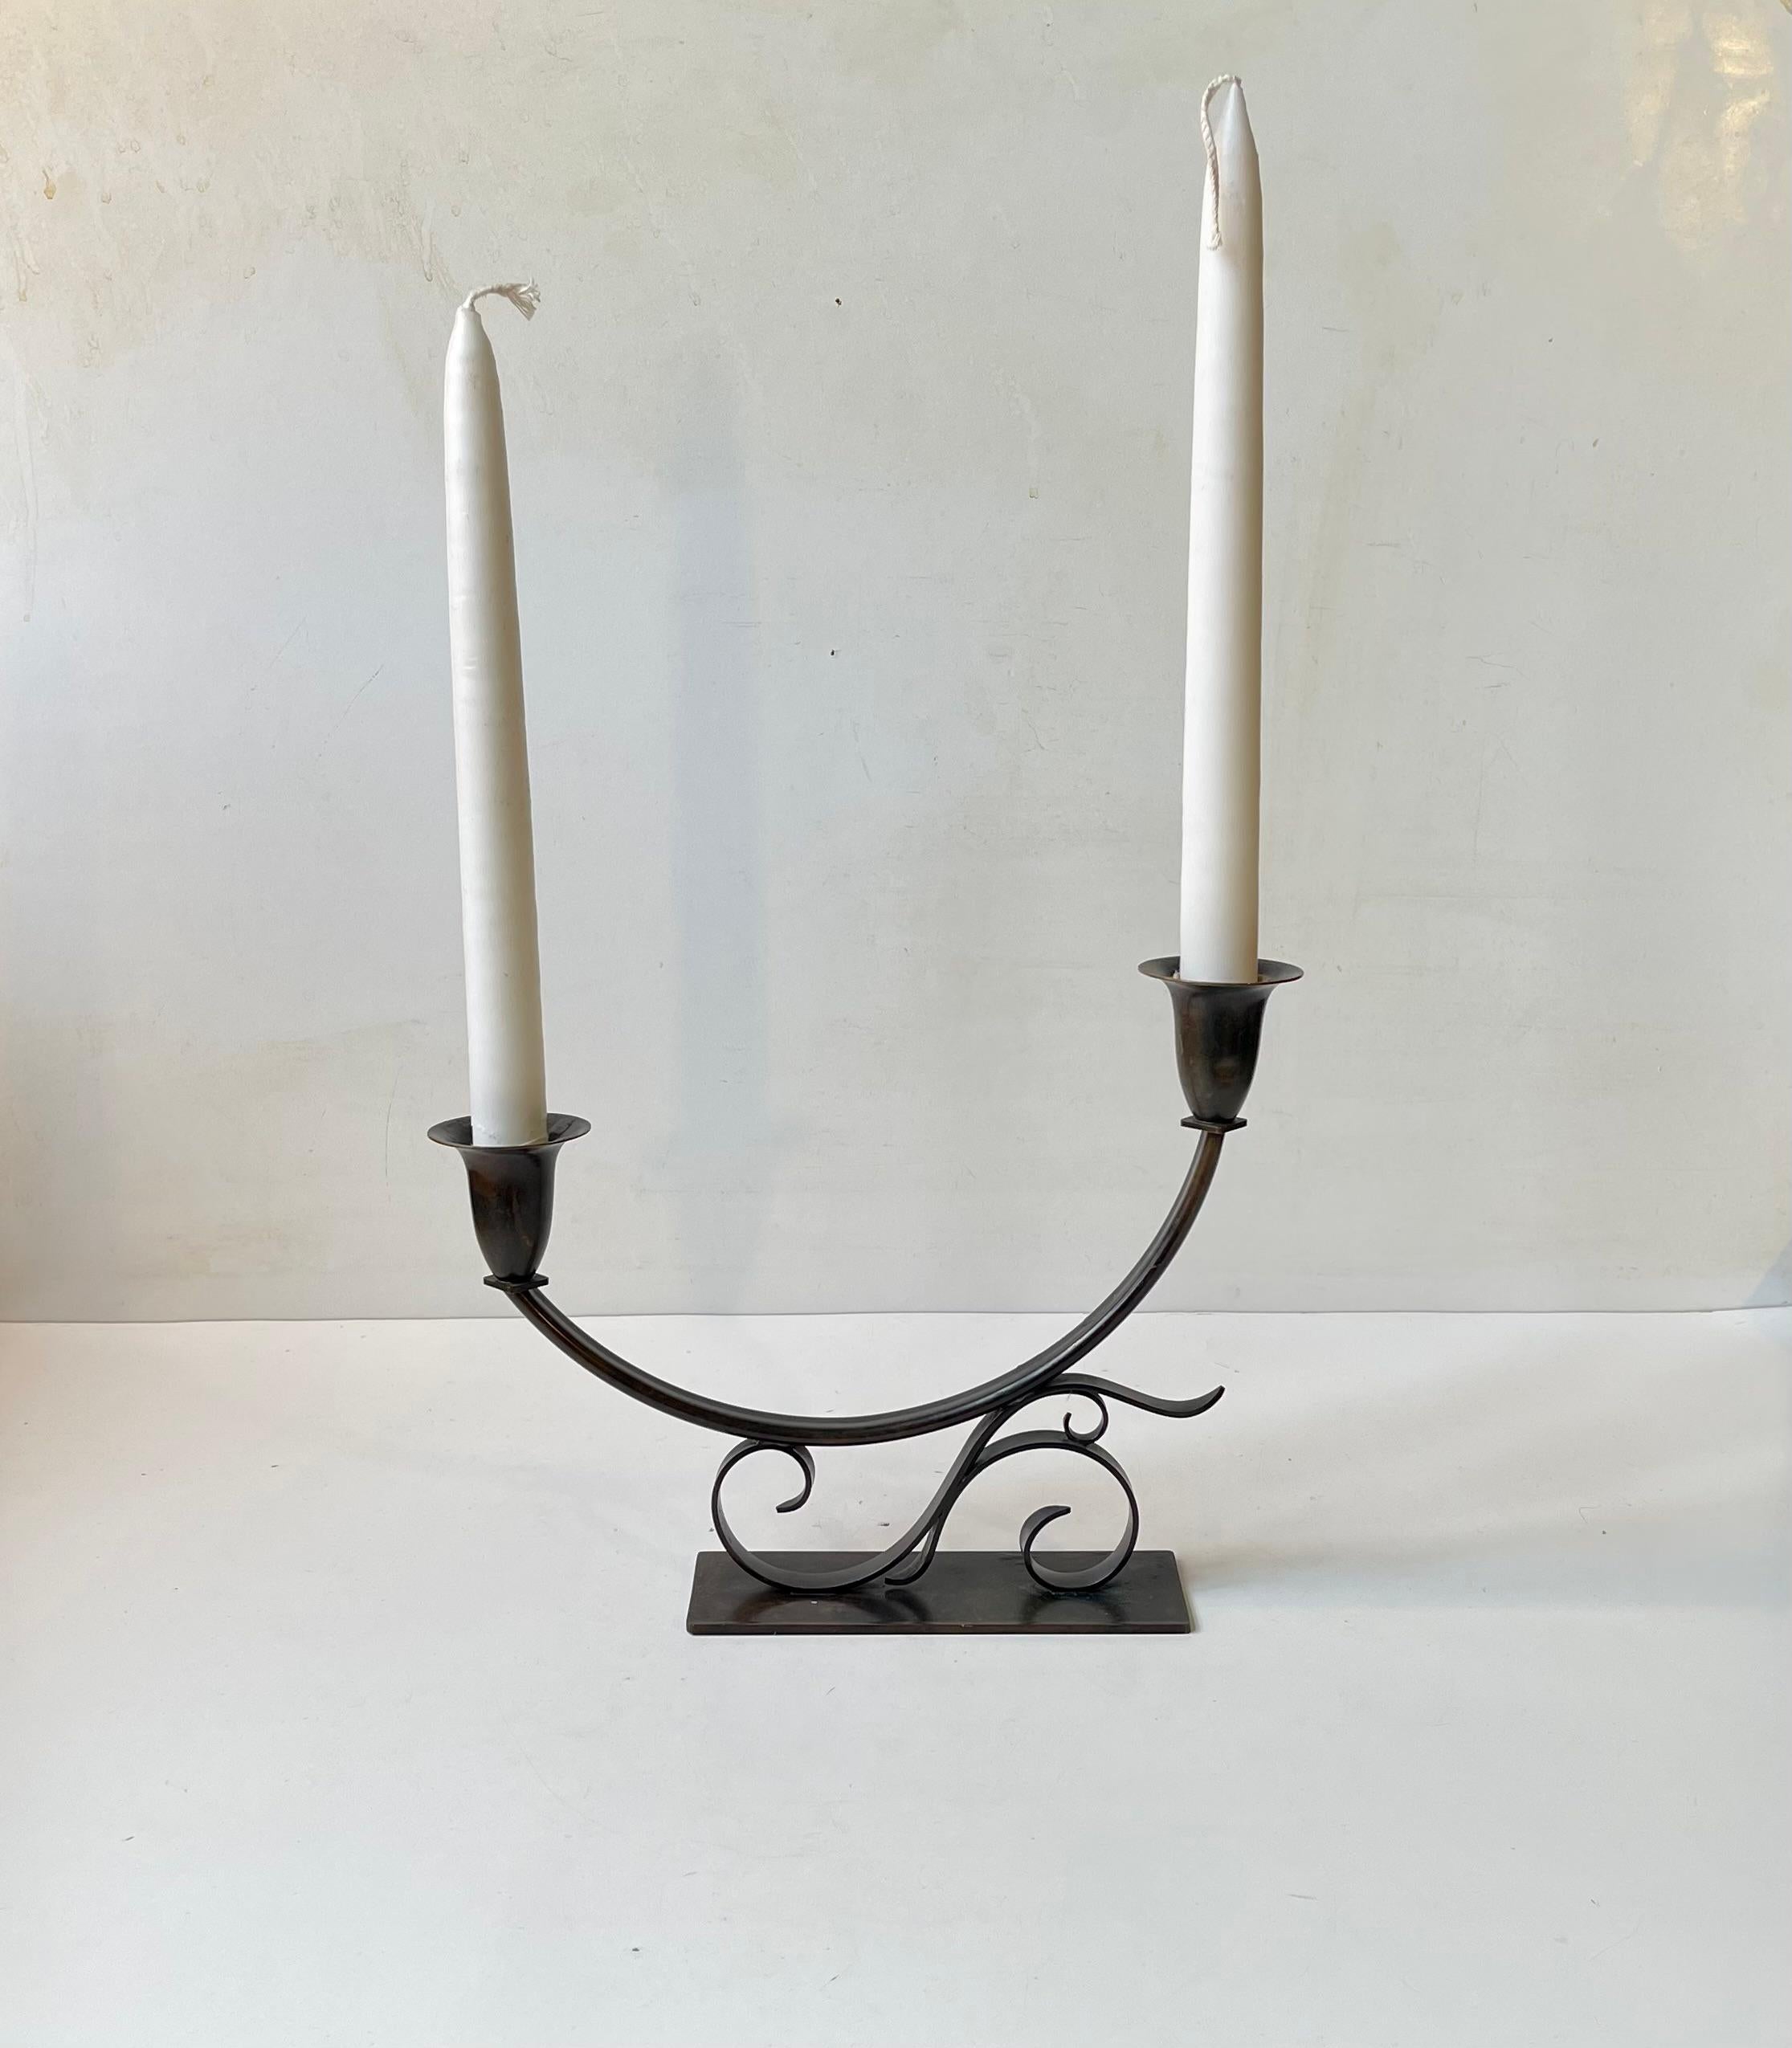 Danish Art Deco Patinated Bronze Candle Holder by Holger Fredericia, 1930s For Sale